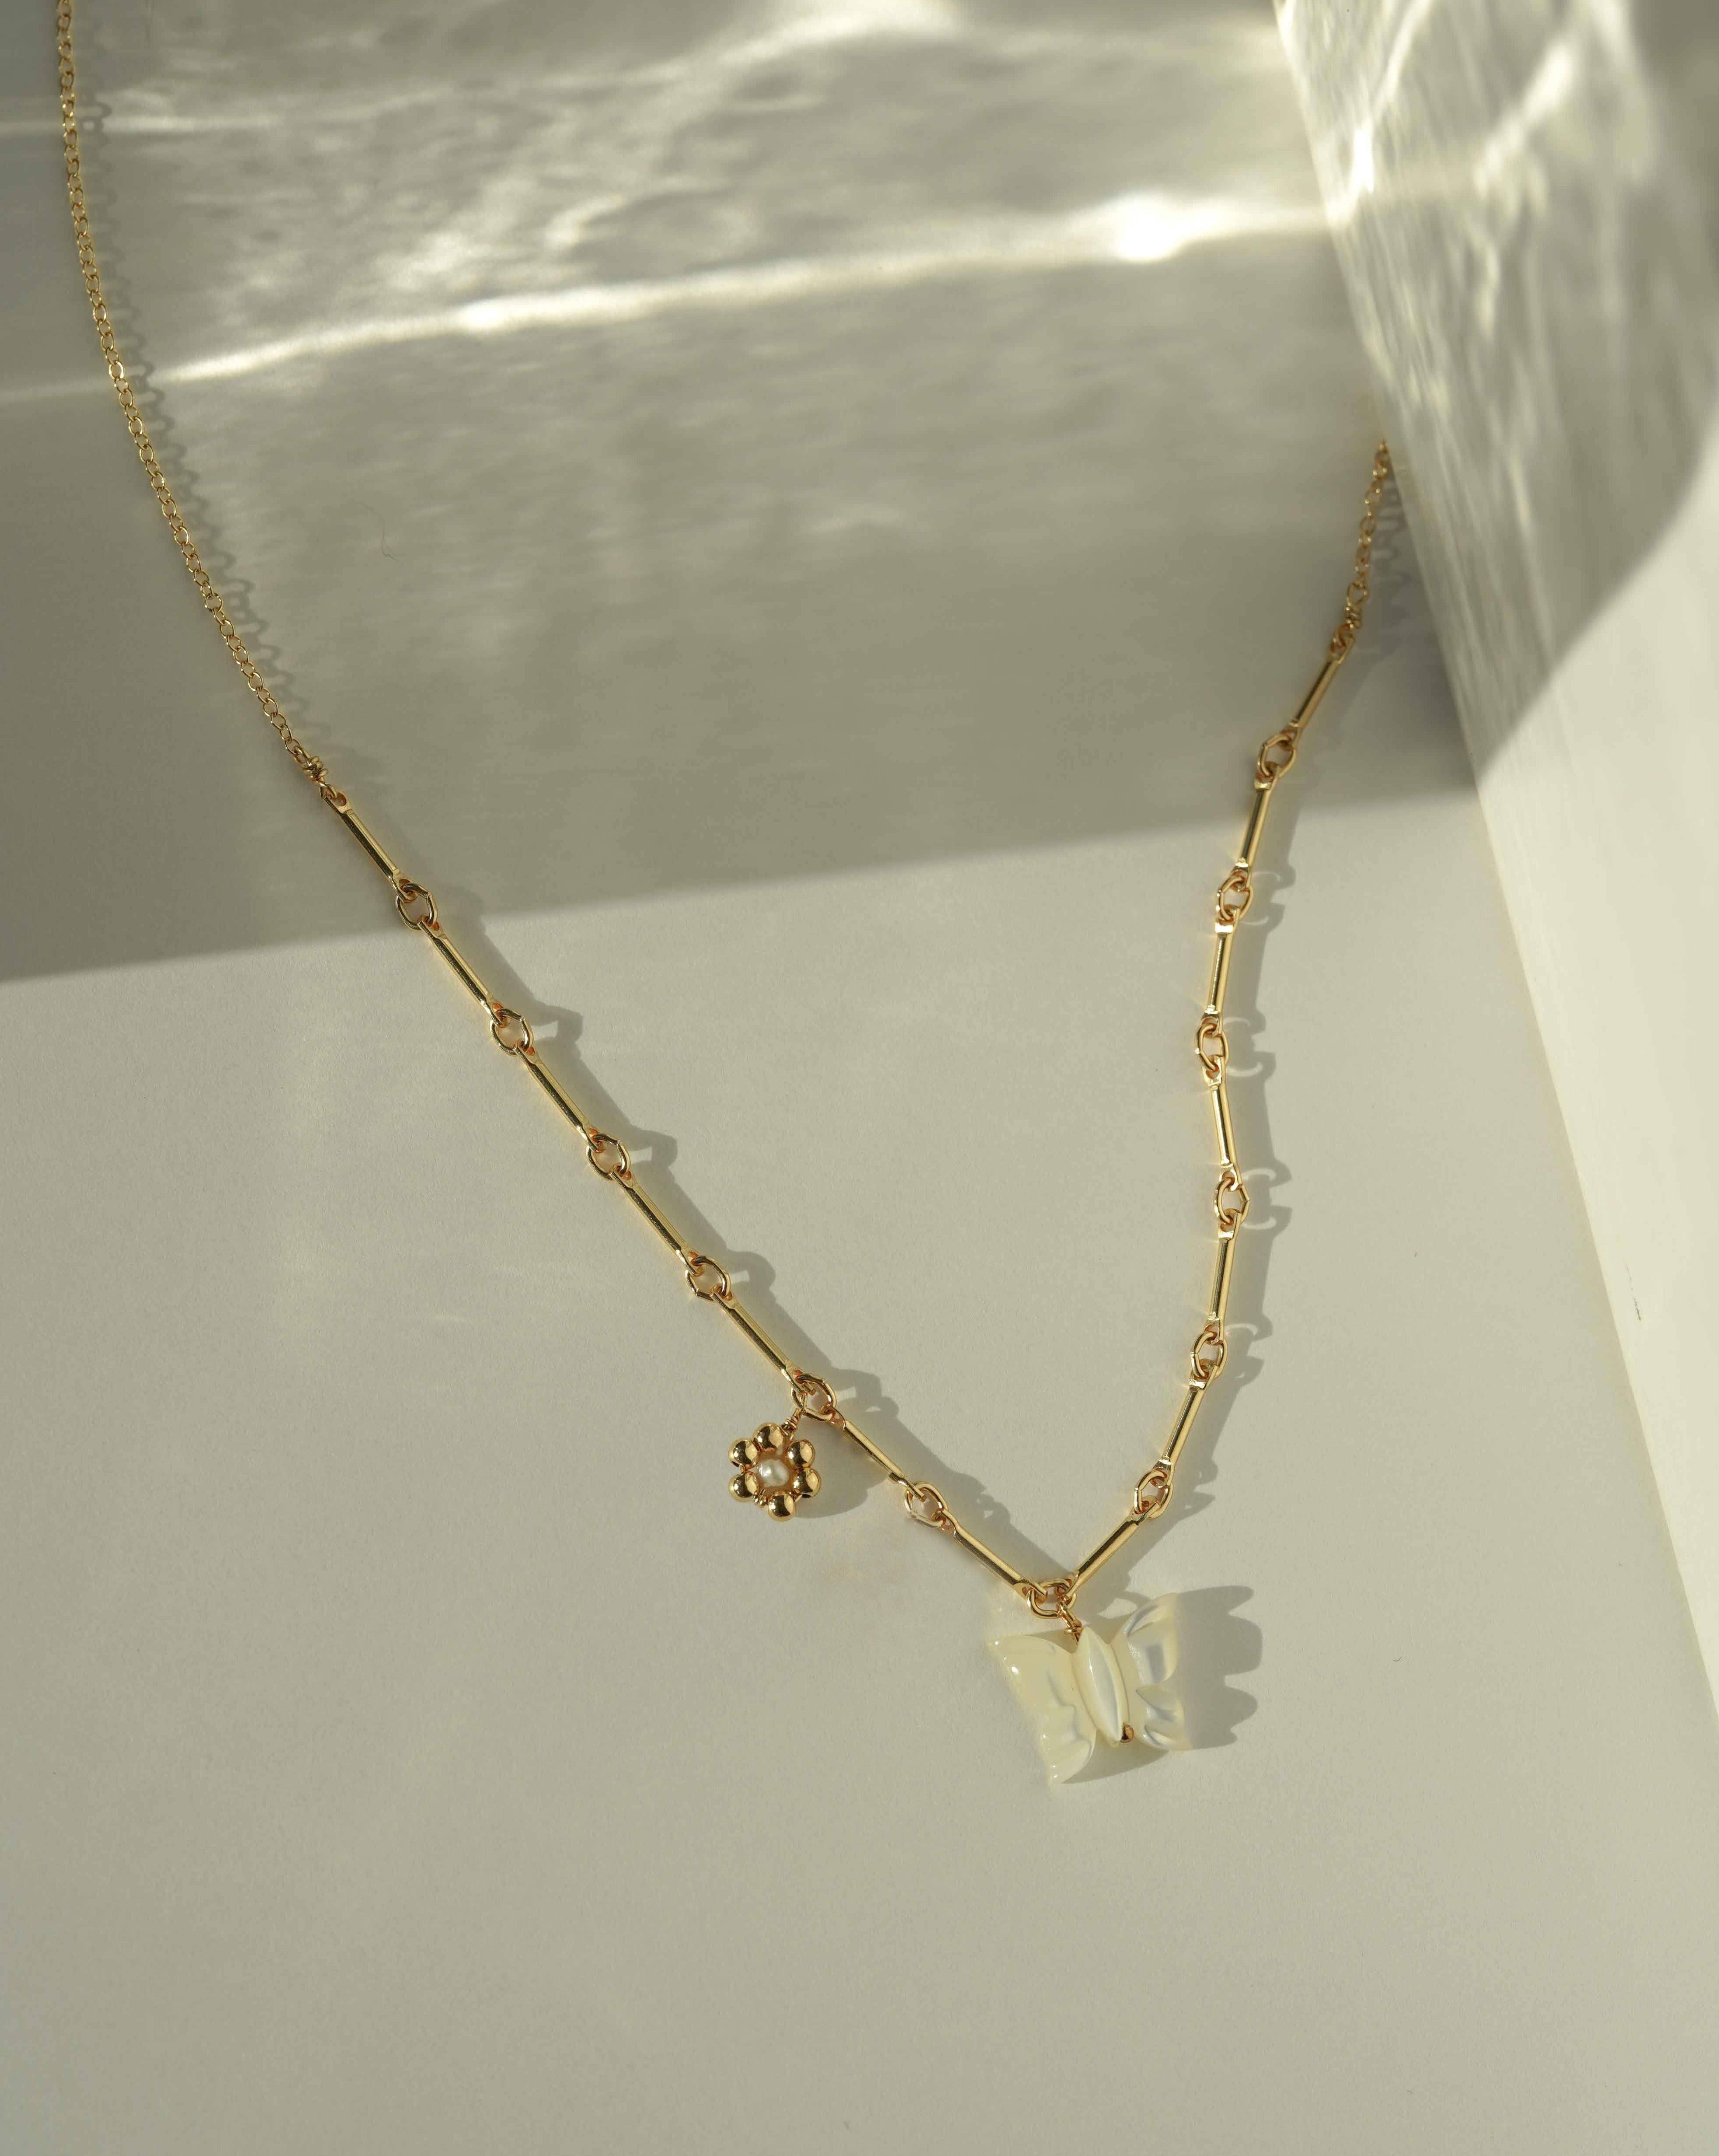 Tinley Necklace by KOZAKH. A 16 to 18 inch adjustable length necklace, with flat cable chain on top half and bar link chain on bottom half, crafted in 14K Gold Filled, featuring a hand-carved Mother of Pearl butterfly charm and a handmade gold beaded daisy with 2mm pearl in the center.